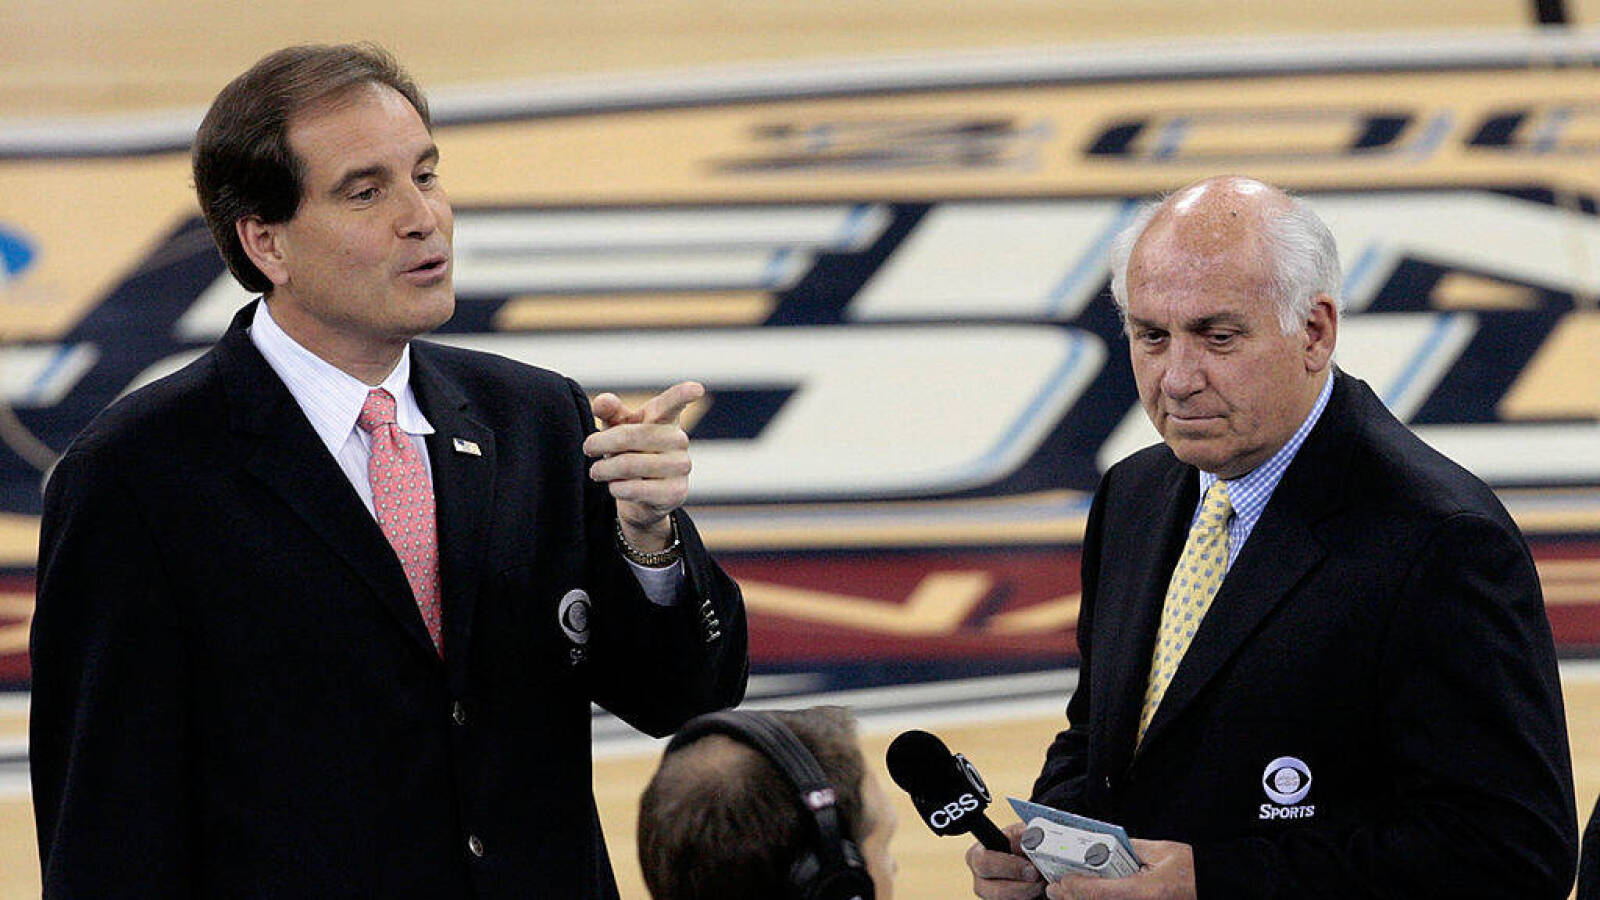 Video: Jim Nantz offers touching tribute to longtime Final Four analyst Billy Packer